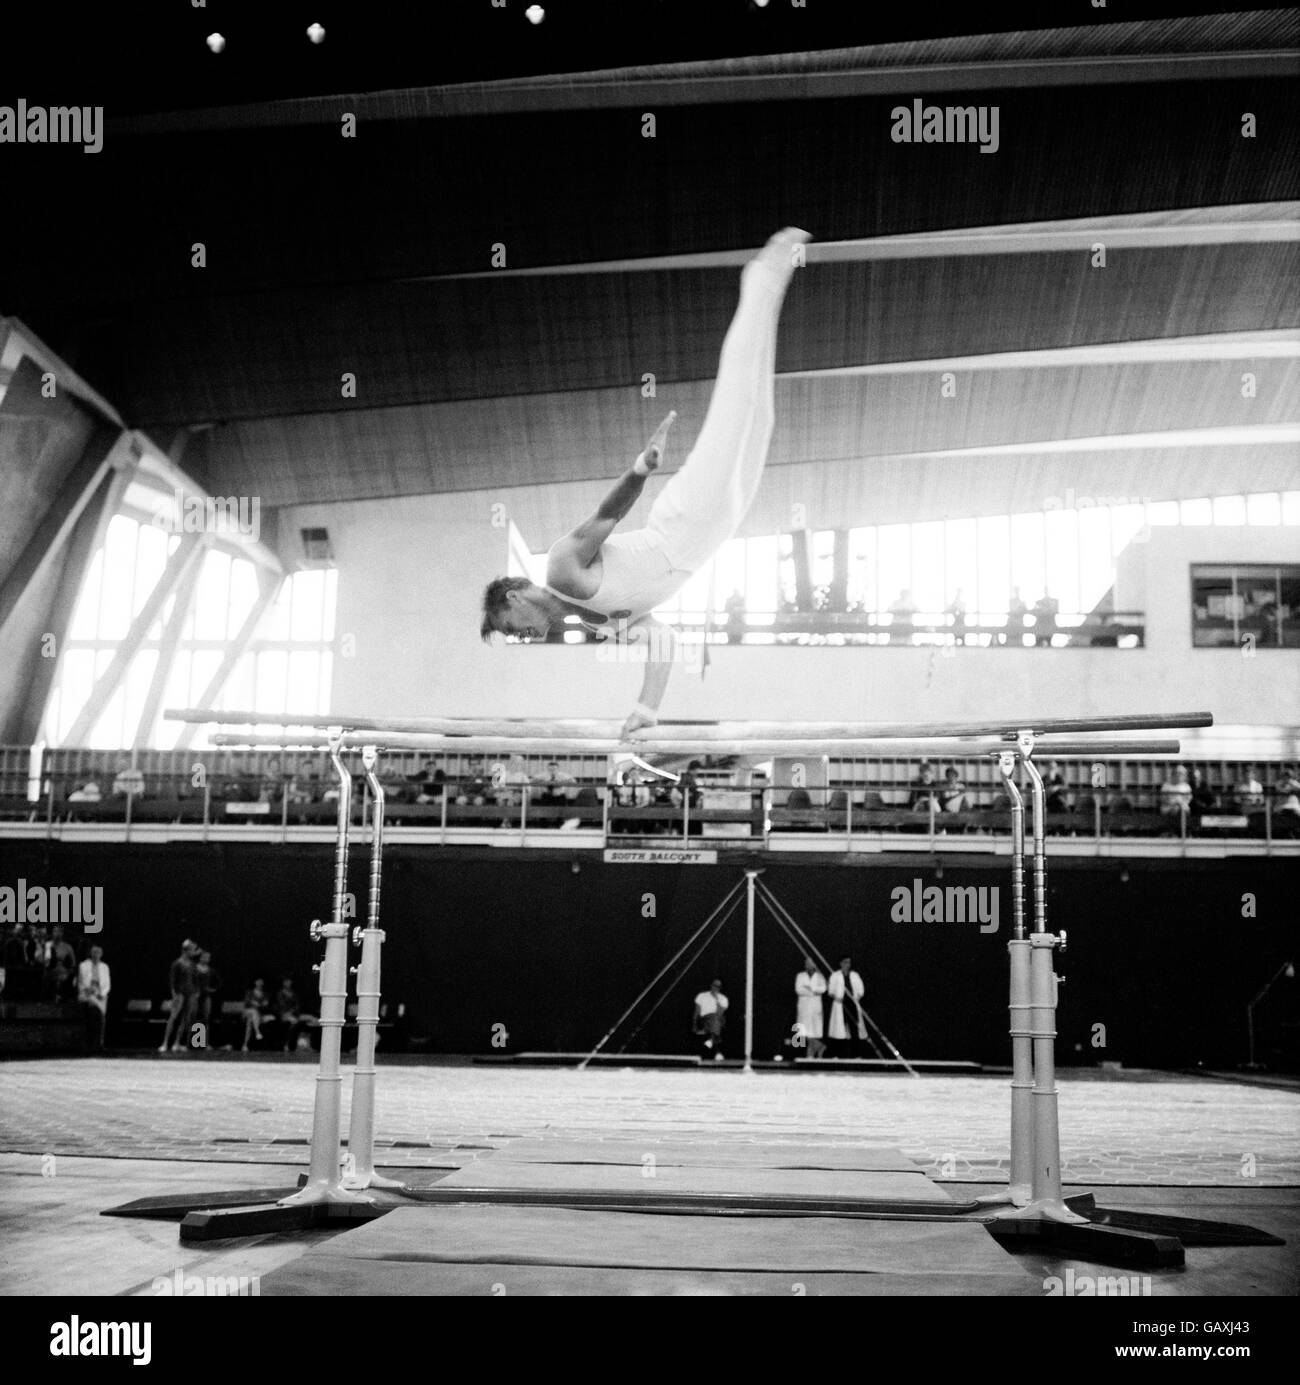 Gymnastics - International Sports Festival and Exhibition - Crystal Palace. Boris Shakhlin, a member of the Russian team who gave a gymnastic display at the festival, in action on the parallel bars Stock Photo